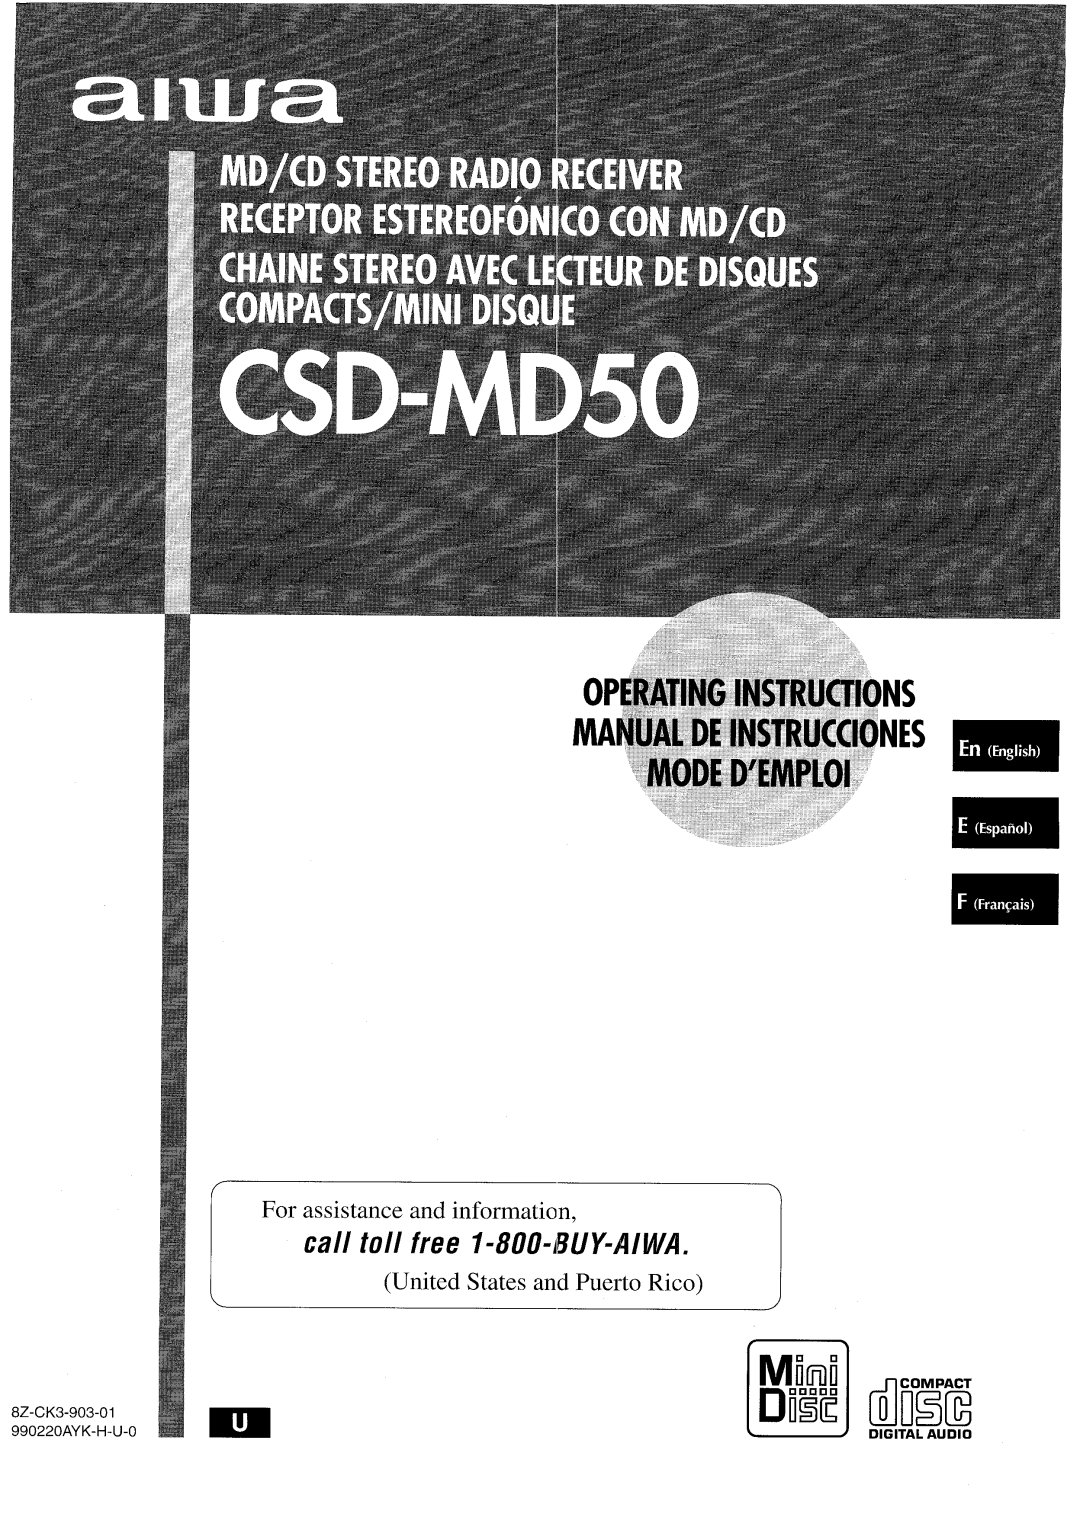 Aiwa CSD-MD50 manual call toll free I-800 -WY+WVA, For assistance and information, United States and Puerto Rico 